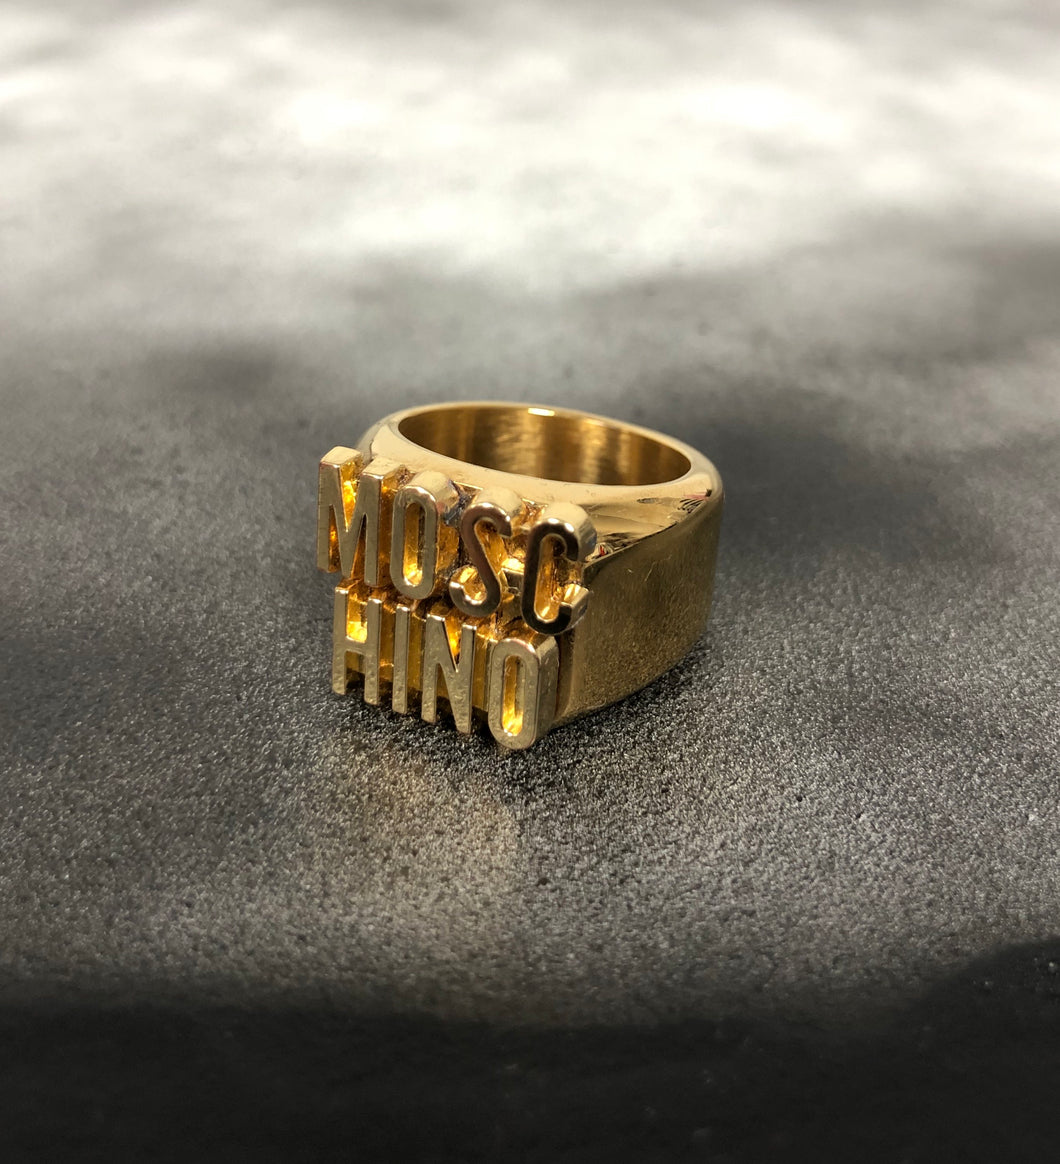 Reworked Moschino Ring